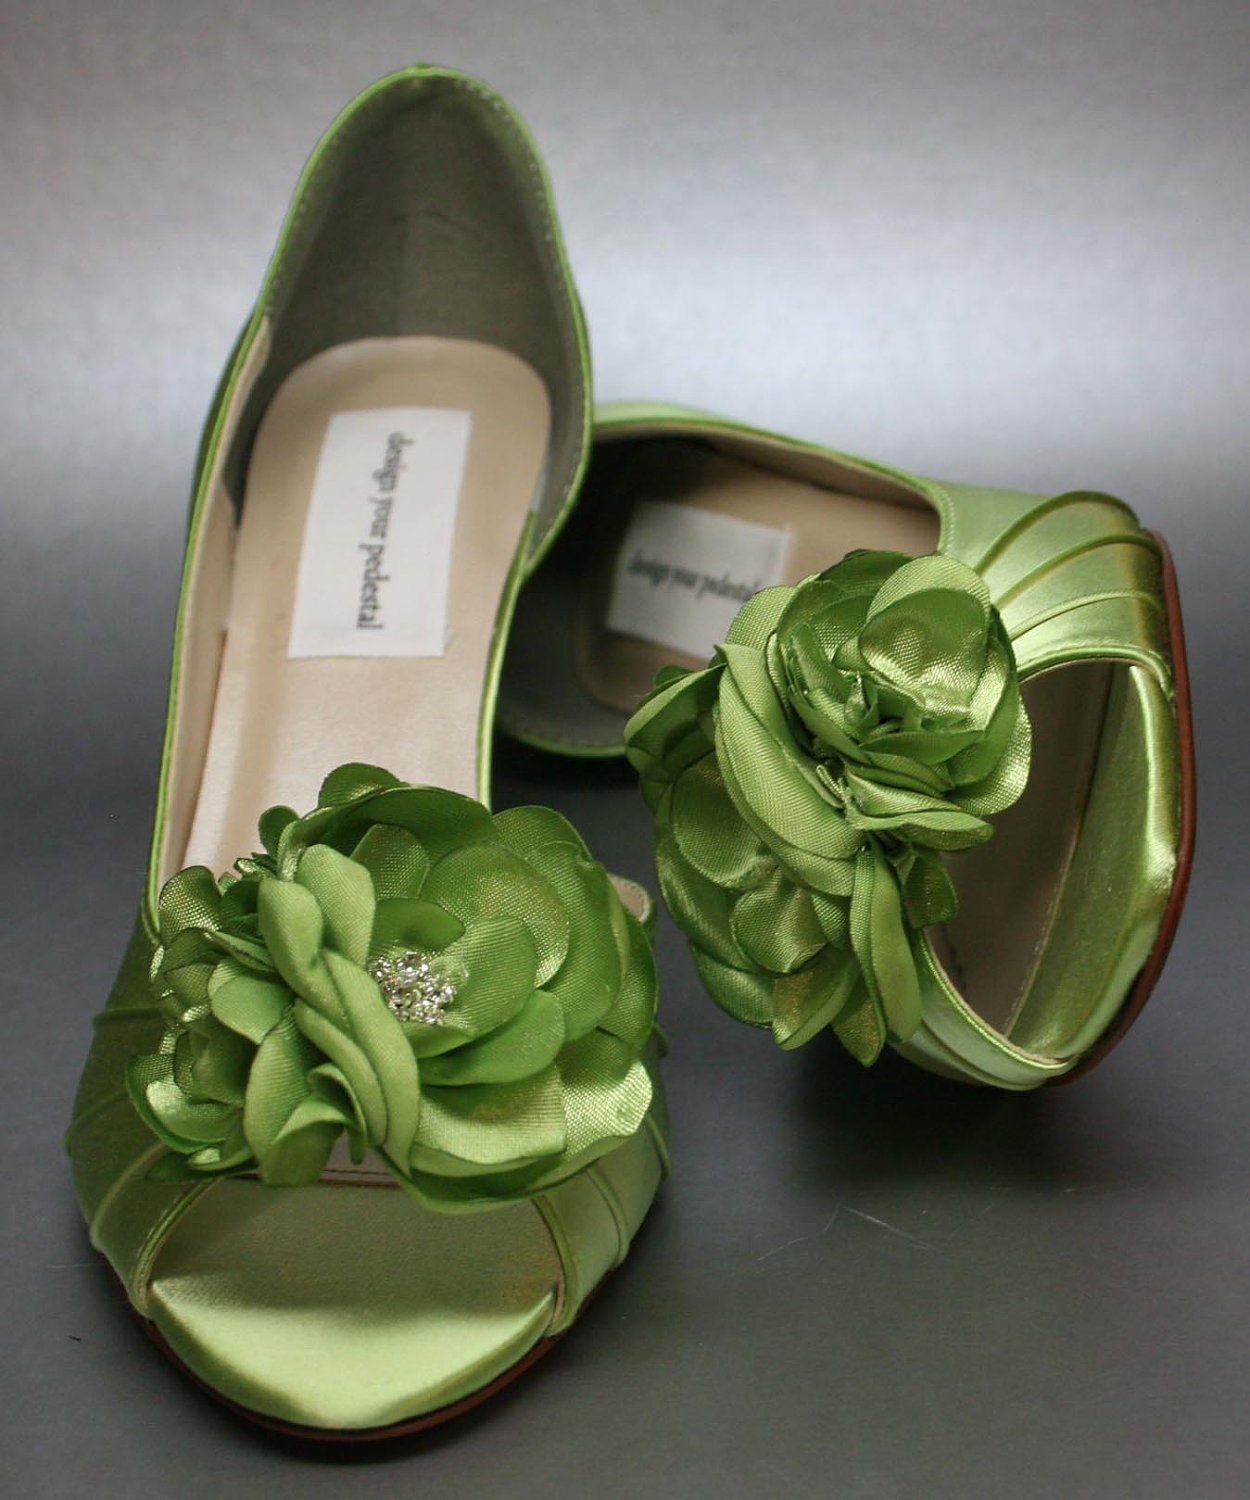 Wedding Shoes -- Spring Green Peeptoes with Matching Flower Adornment - DesignYourPedestal